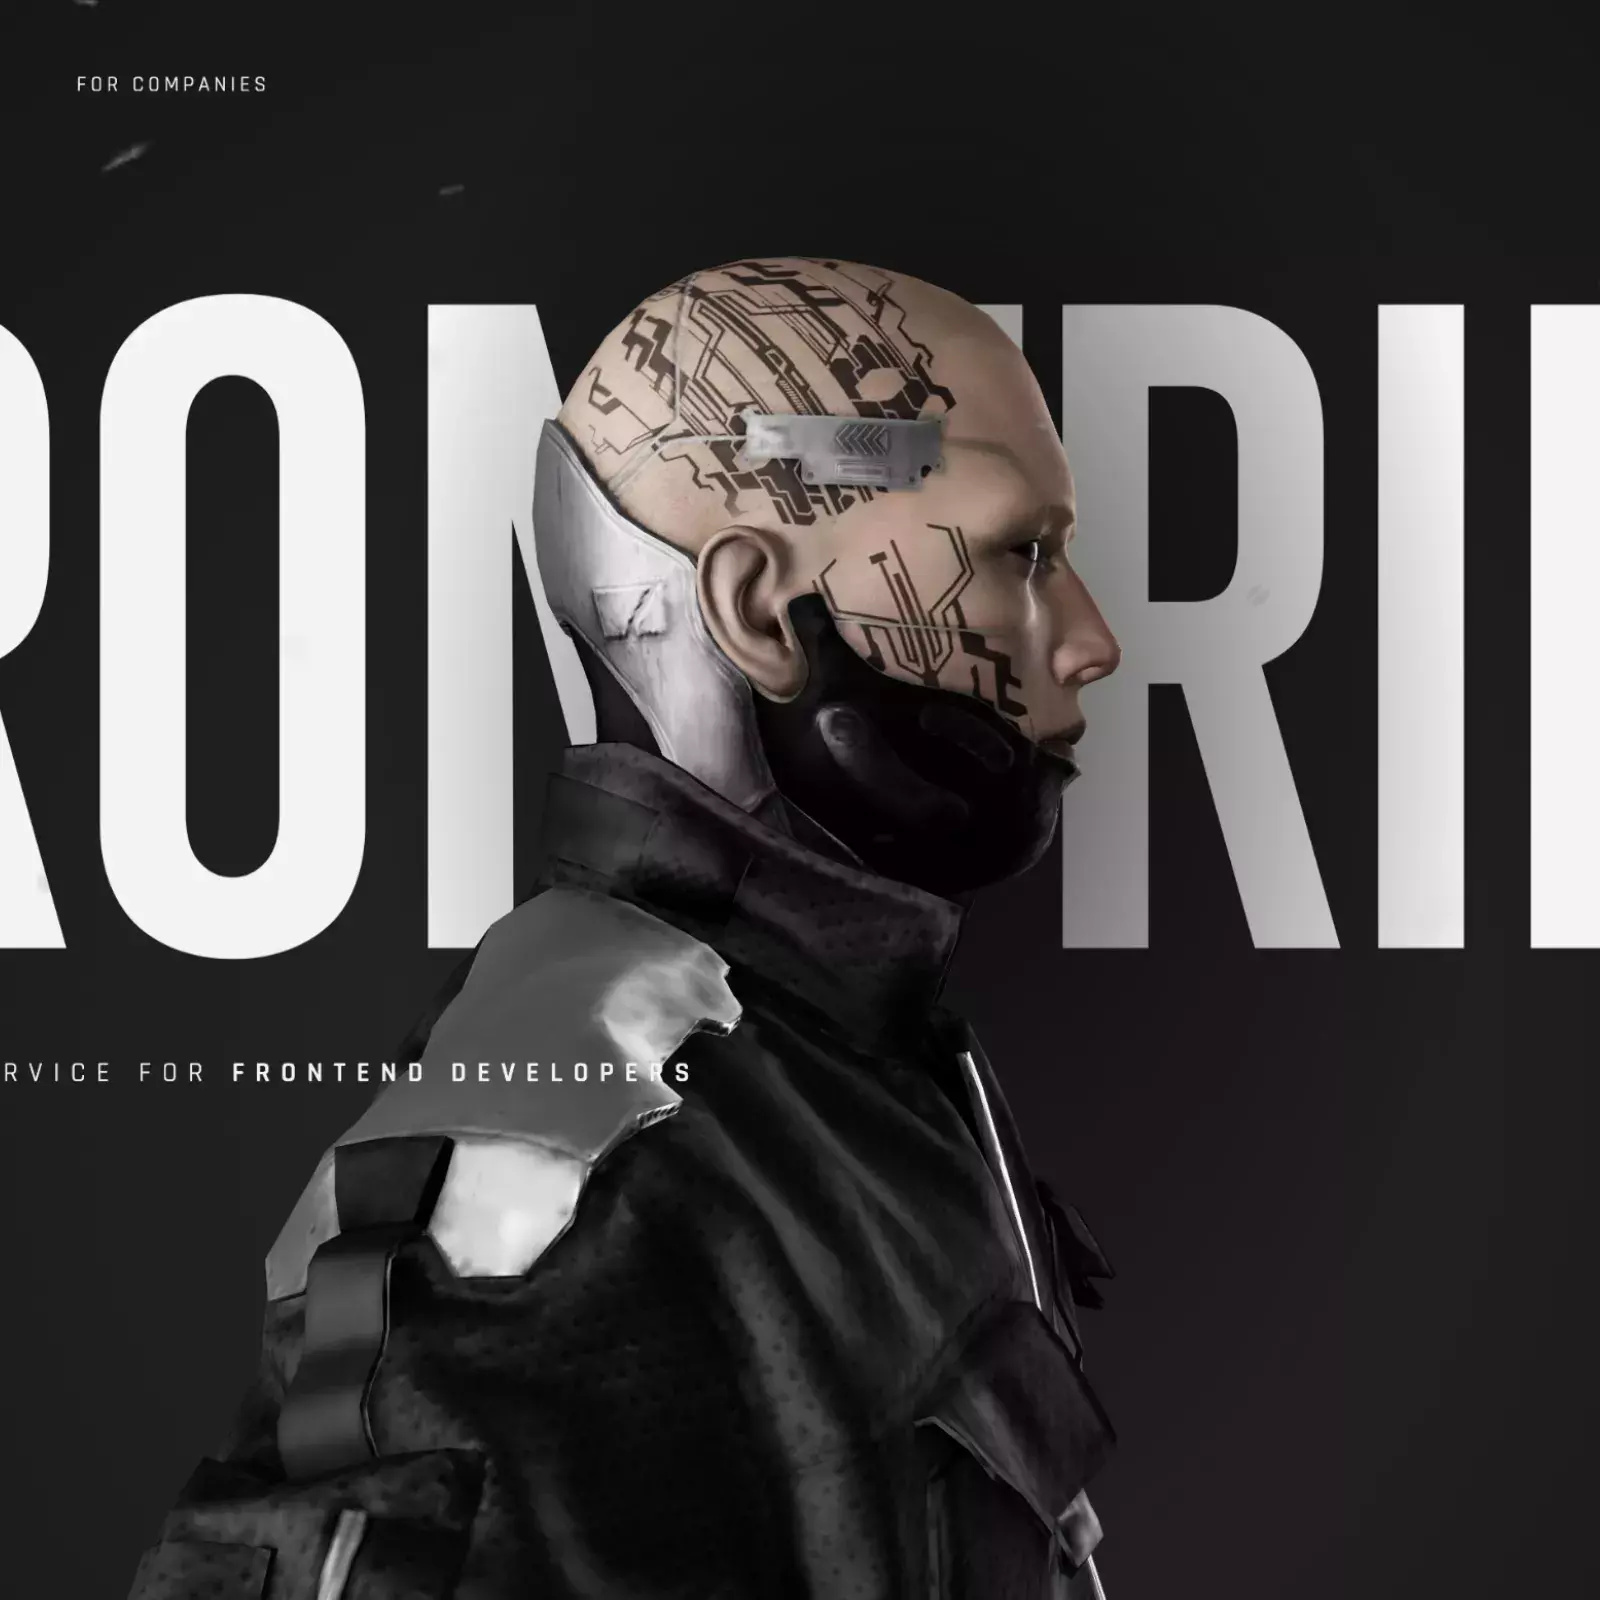 SciFi Interface and Cyberpunk inspired new Frontribe site